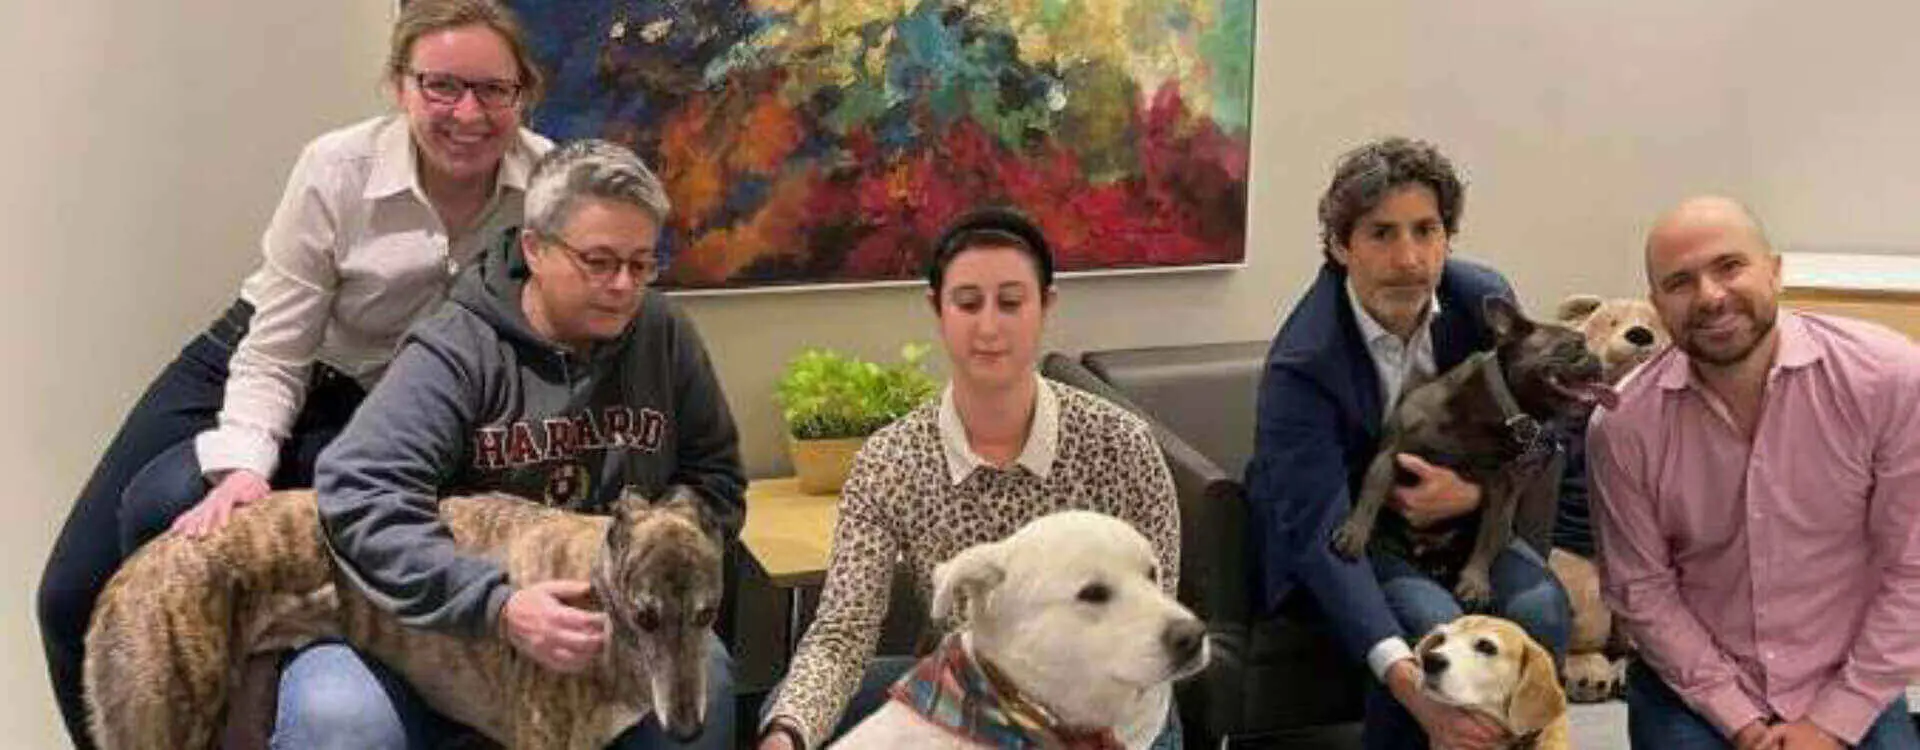 From Left to Right: Ivanna Iwasykiw, Simona Jellinek with Ryder (dog), Jessica Golosky with Fabien (dog), Charles Gluckstein with Duke and Sam (dogs) and Jonathan Burton